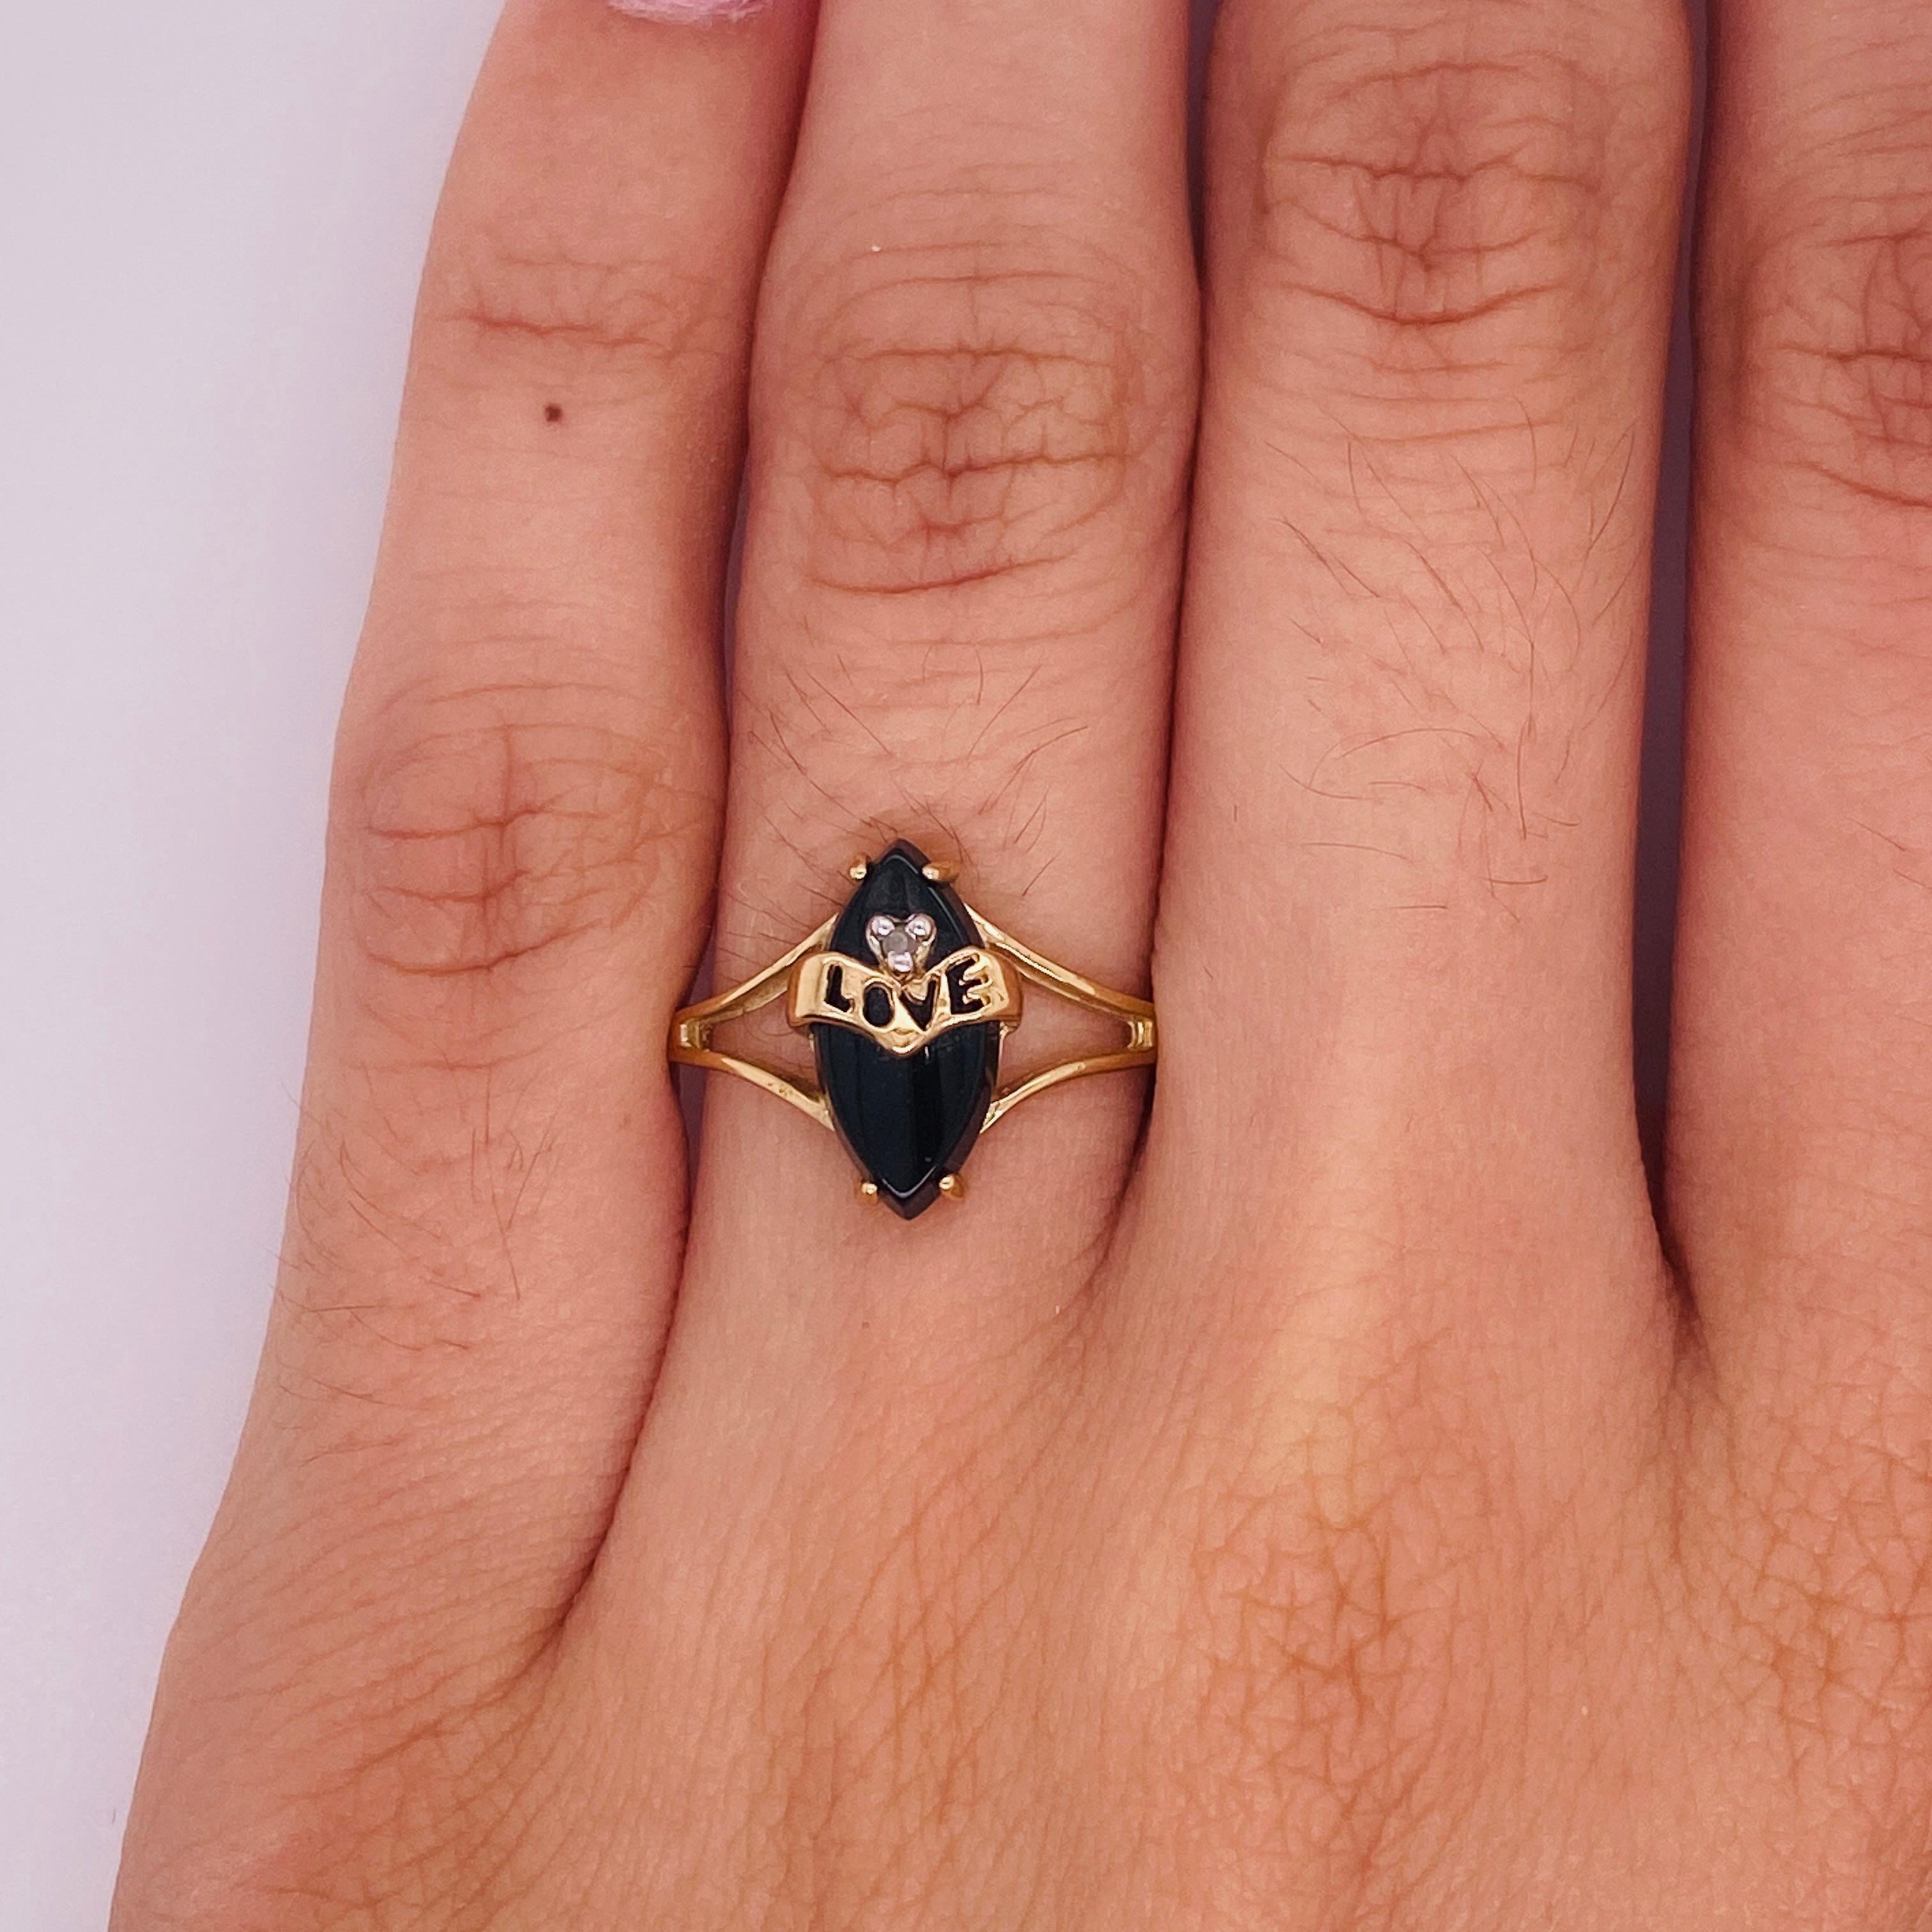 Spoil someone special with this dainty black onyx love ring. Love, joy, and celebration are represented in the marquise shape of the 1.13 carat onyx tablet. The strong black onyx tablet is the perfect backdrop for the pierced yellow gold ribbon that